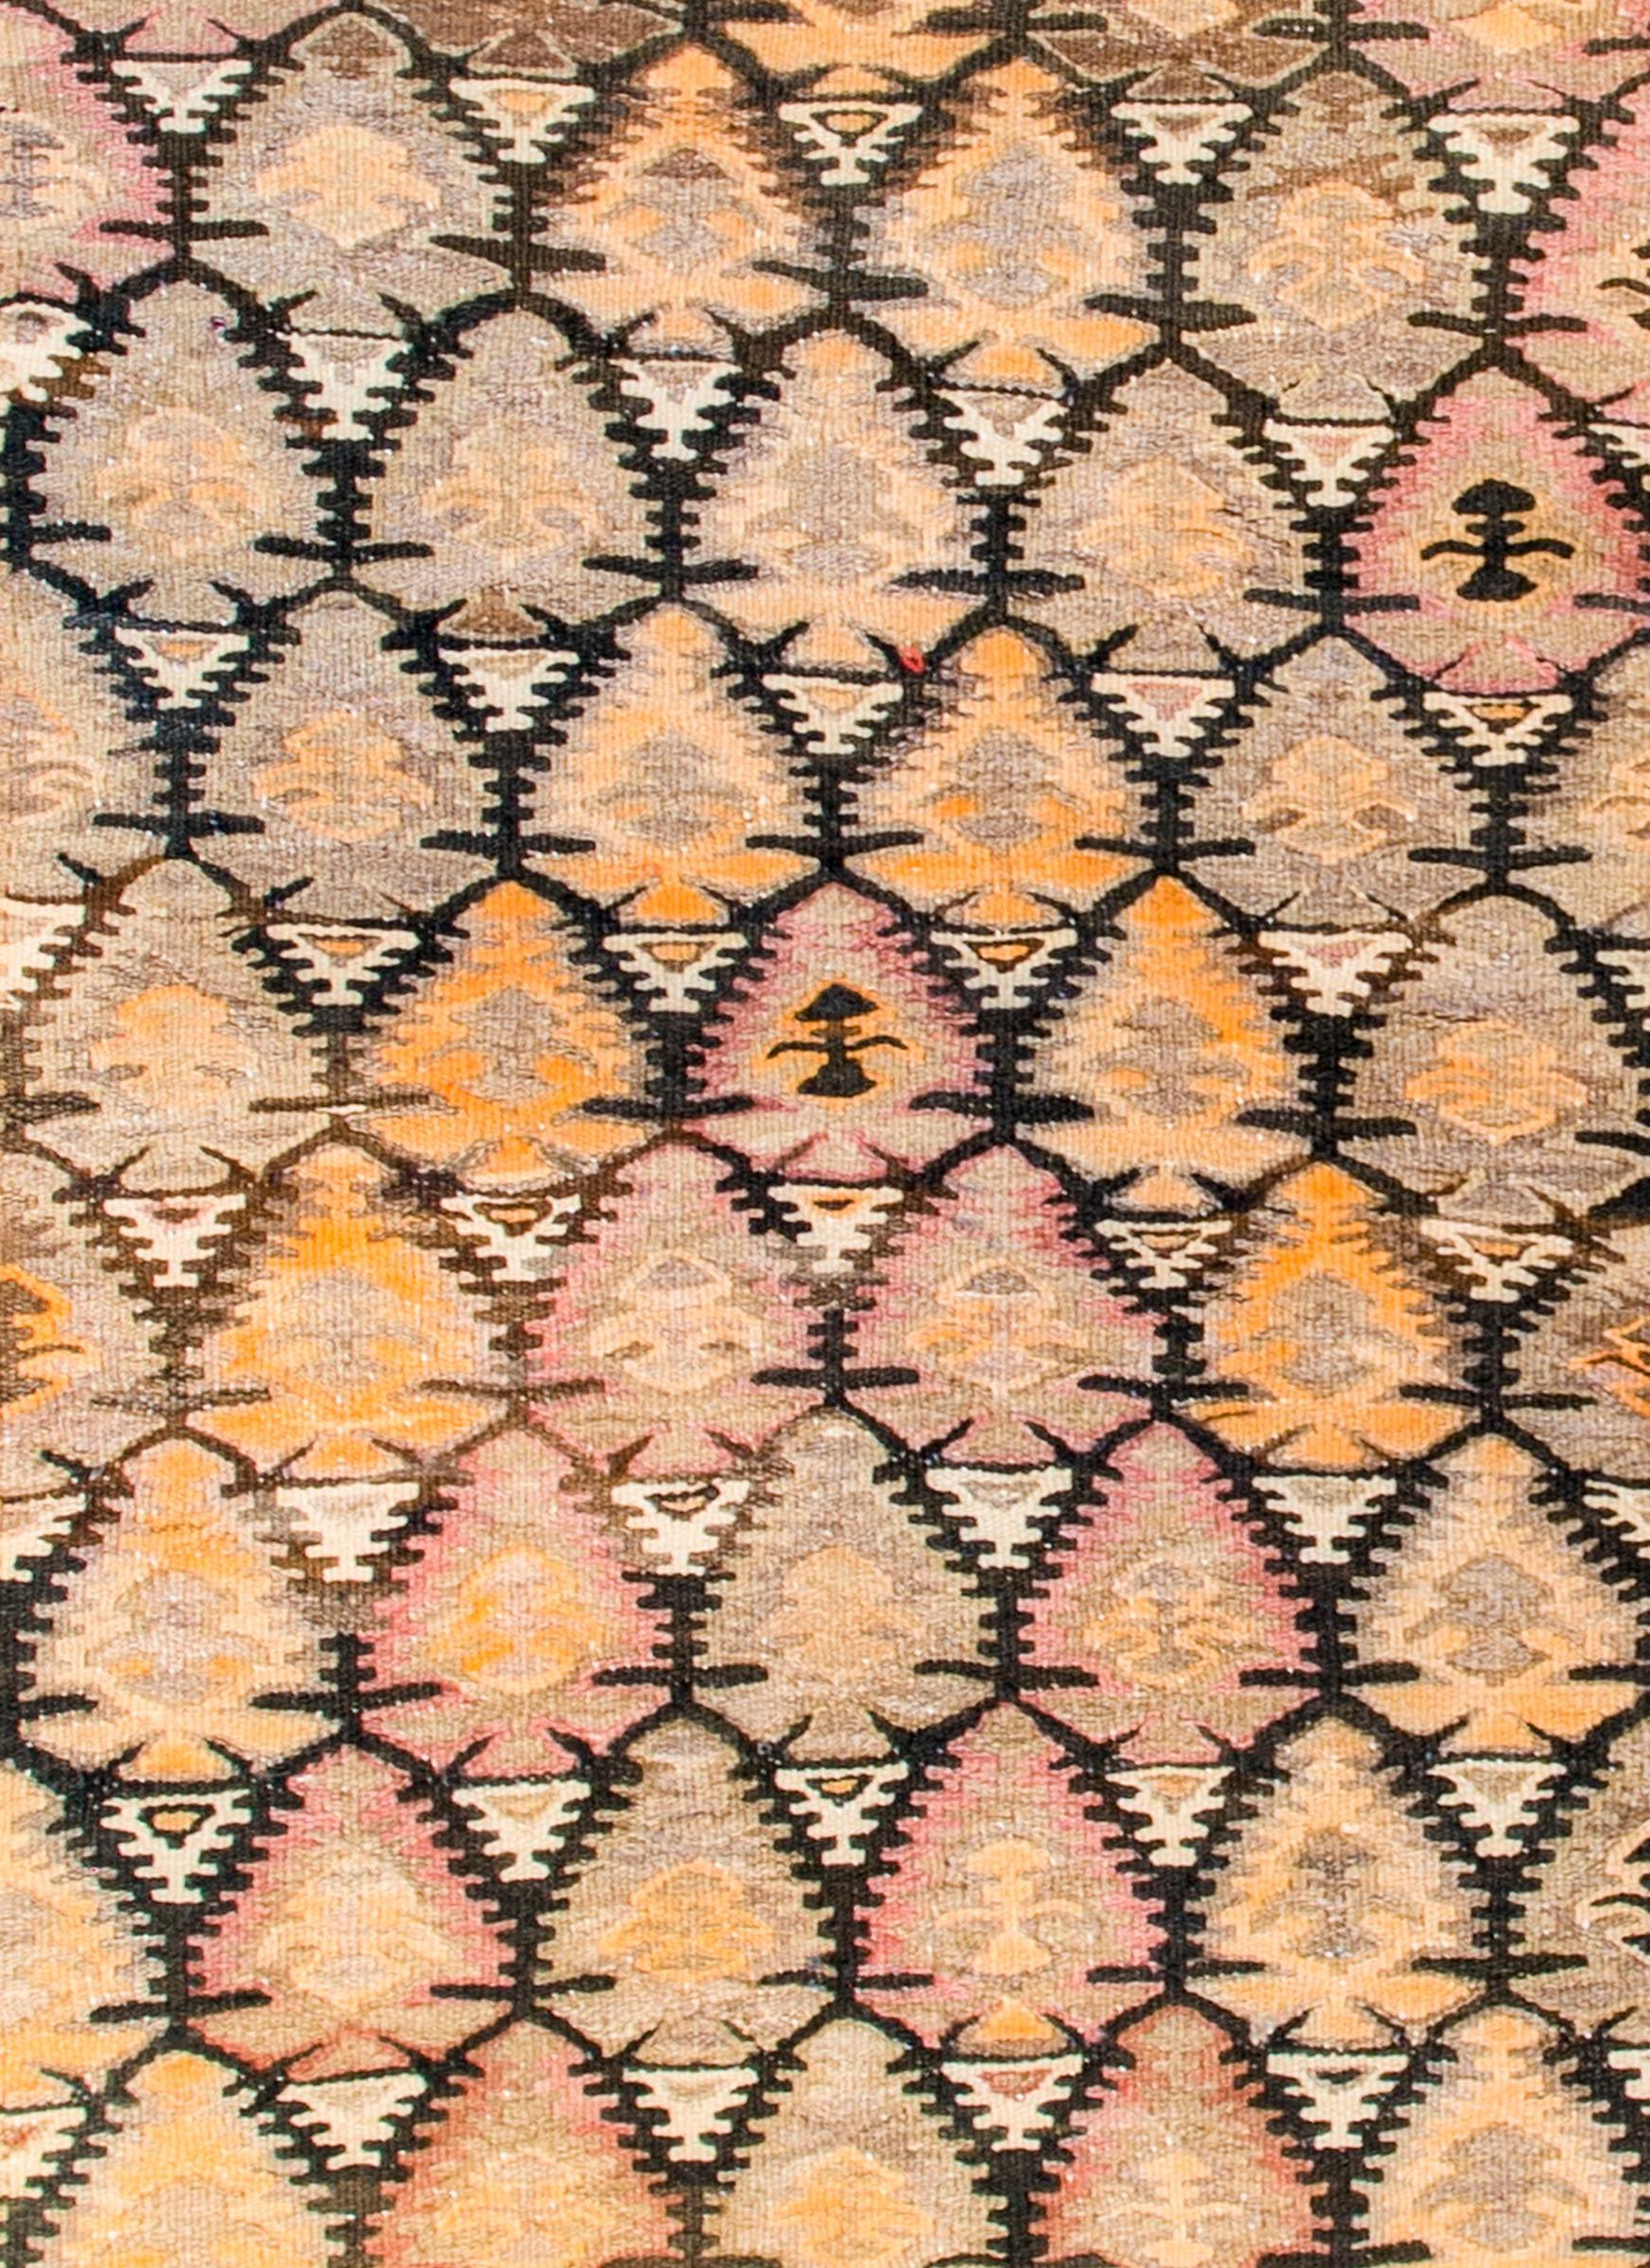 Vegetable Dyed Beautiful Mid-20th Century Qazvin Kilim Rug For Sale